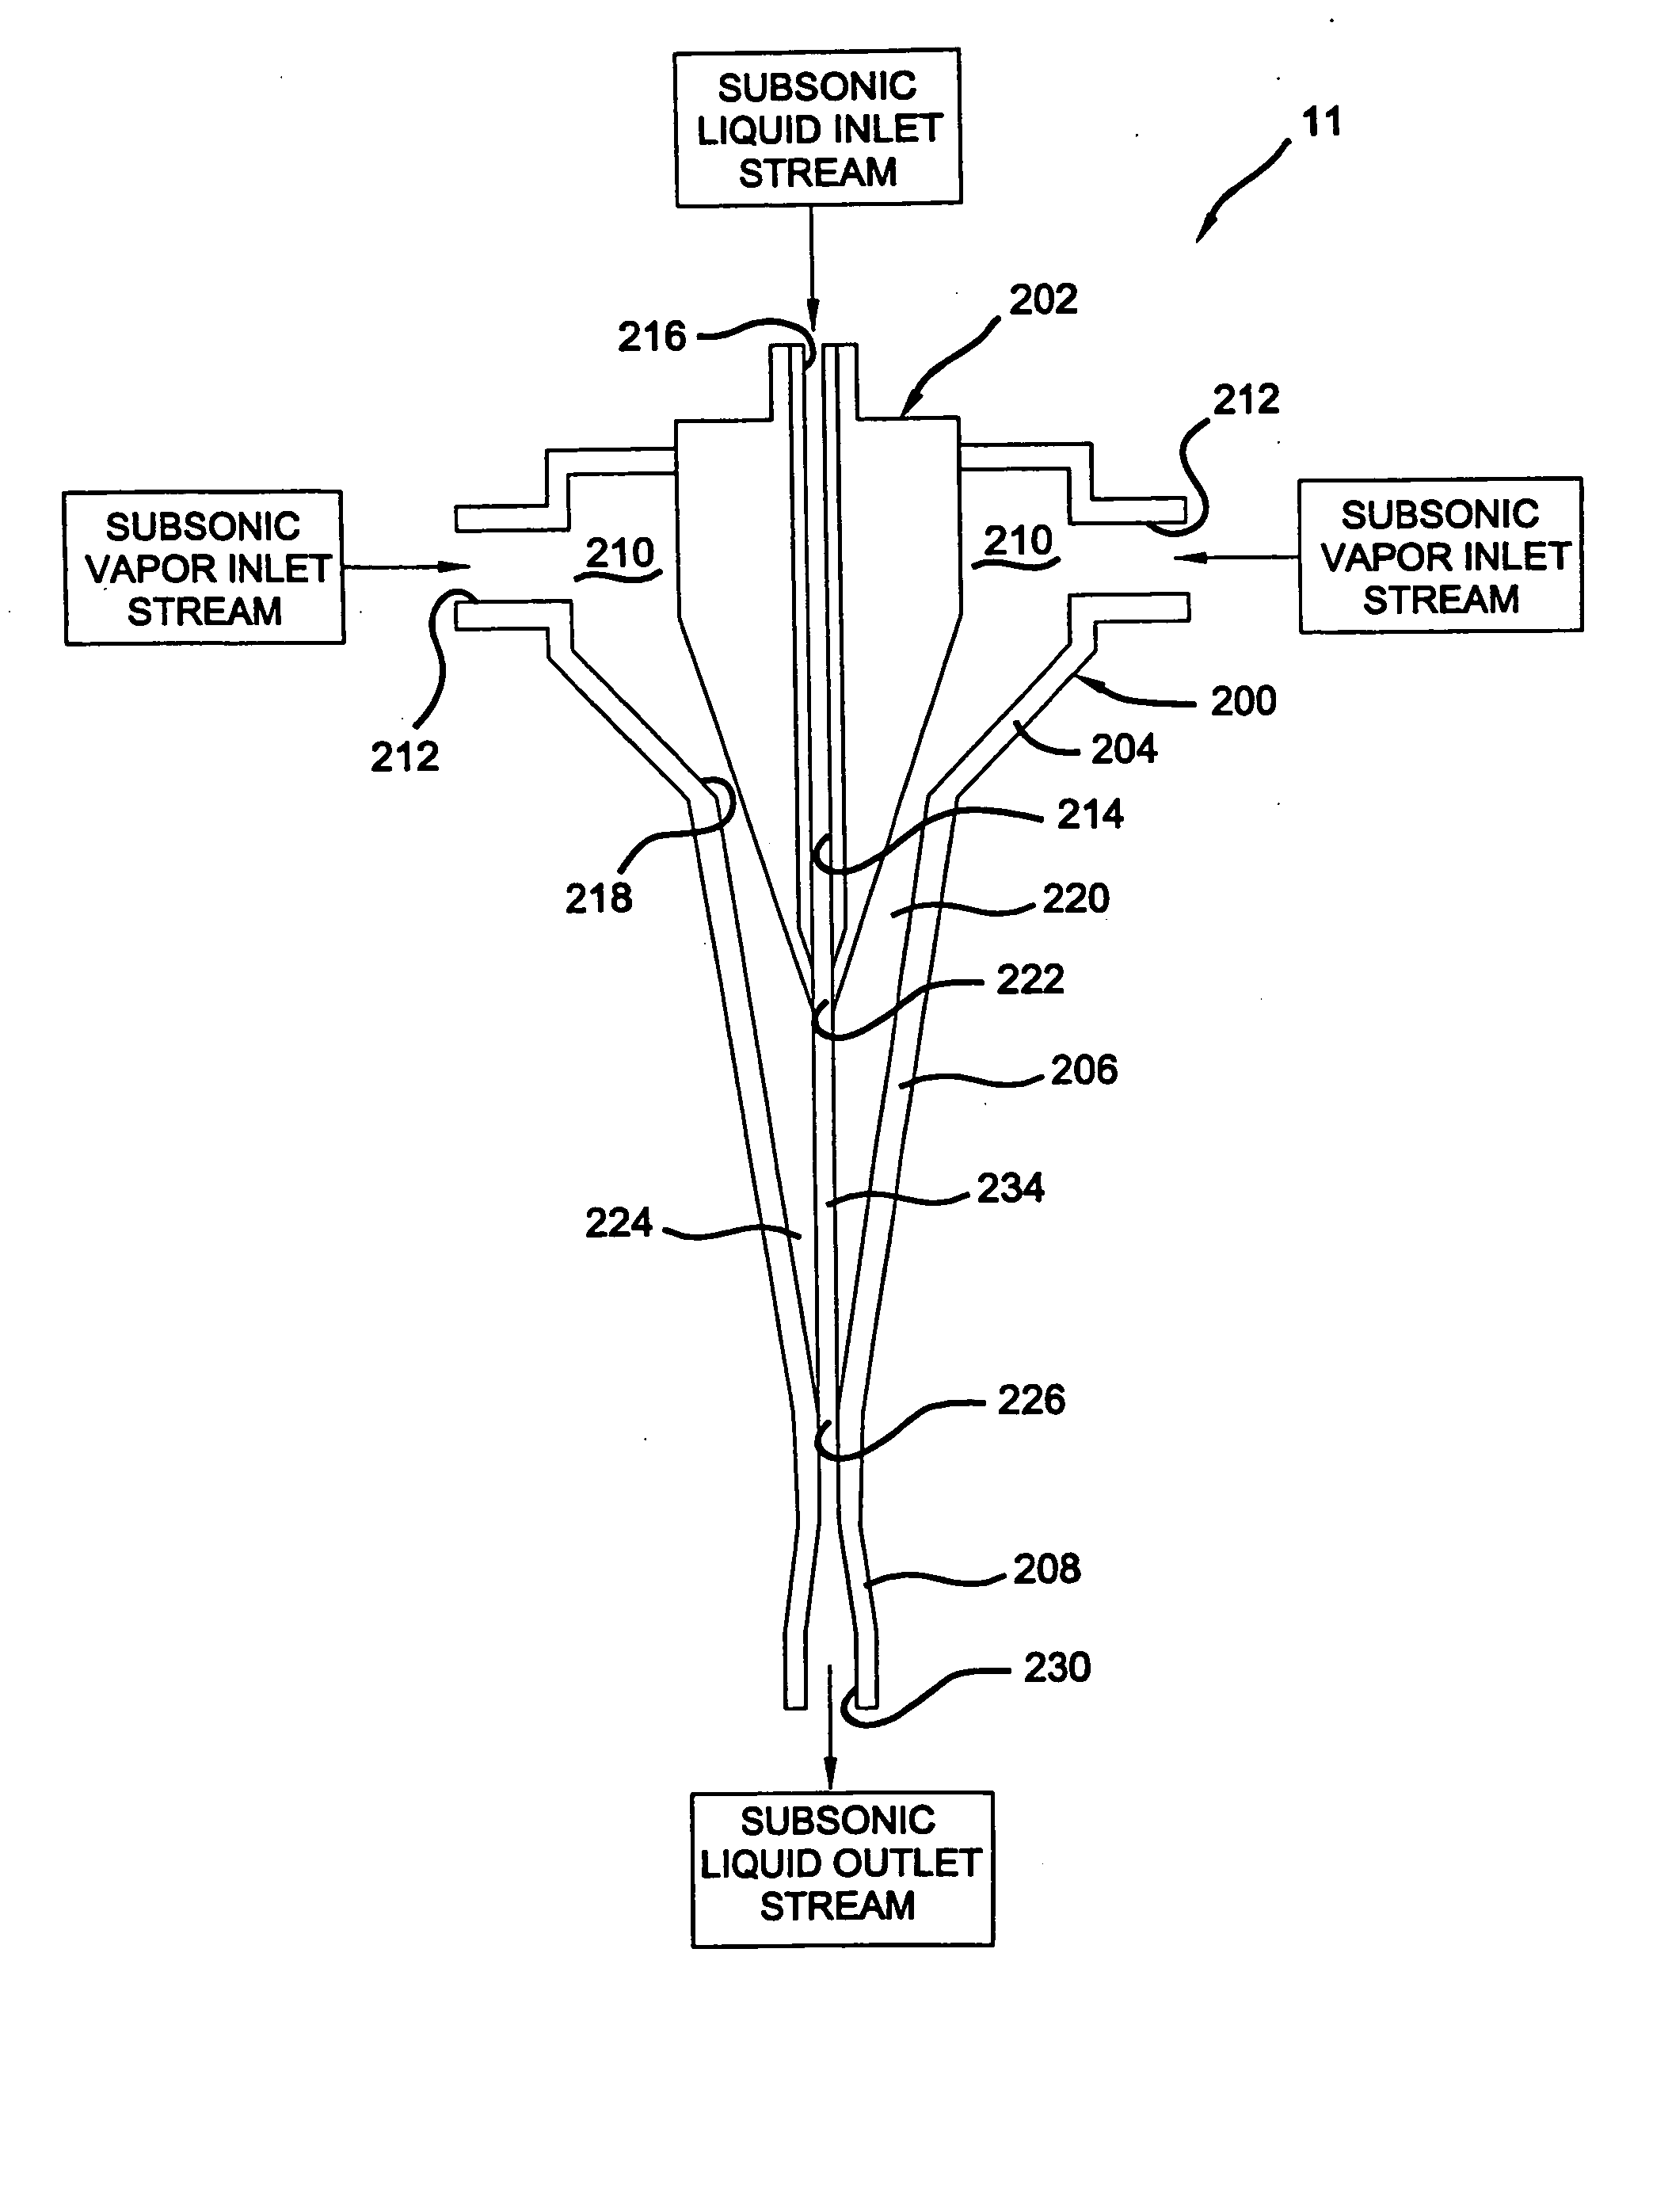 Supersonic vapor compression and heat rejection cycle